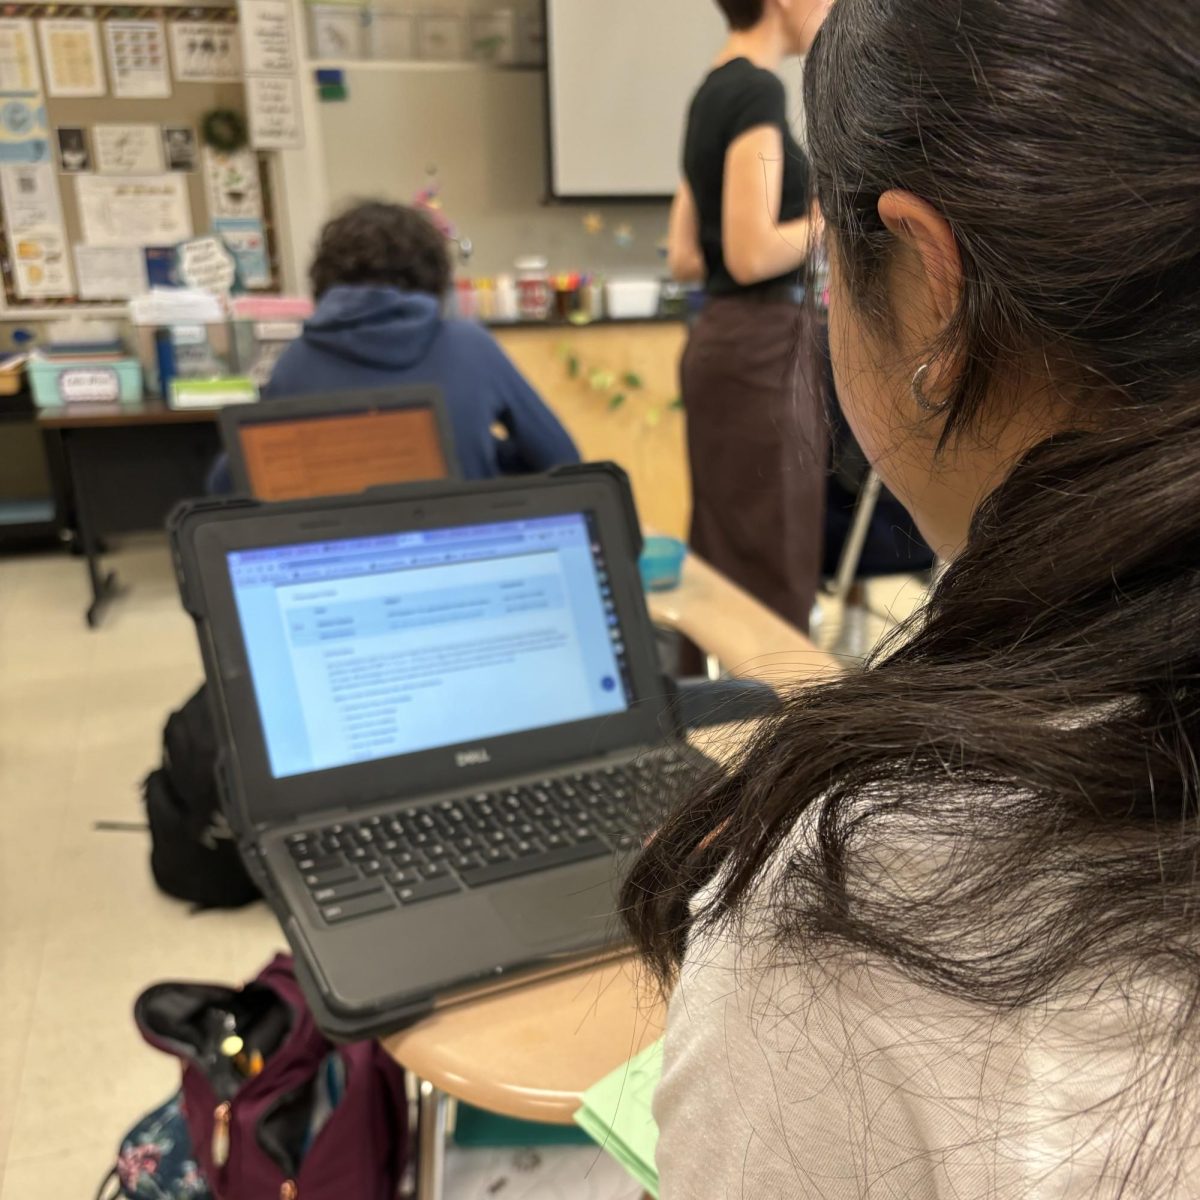 Freshman Hannah Duong is on Naviance, learning more about the Skilled Trades Majors and Career Fair during SRT on April 16. The event is going to be held on April 24, to teach students about different career paths. “I want to explore more and figure out what I want to do,” Duong said.